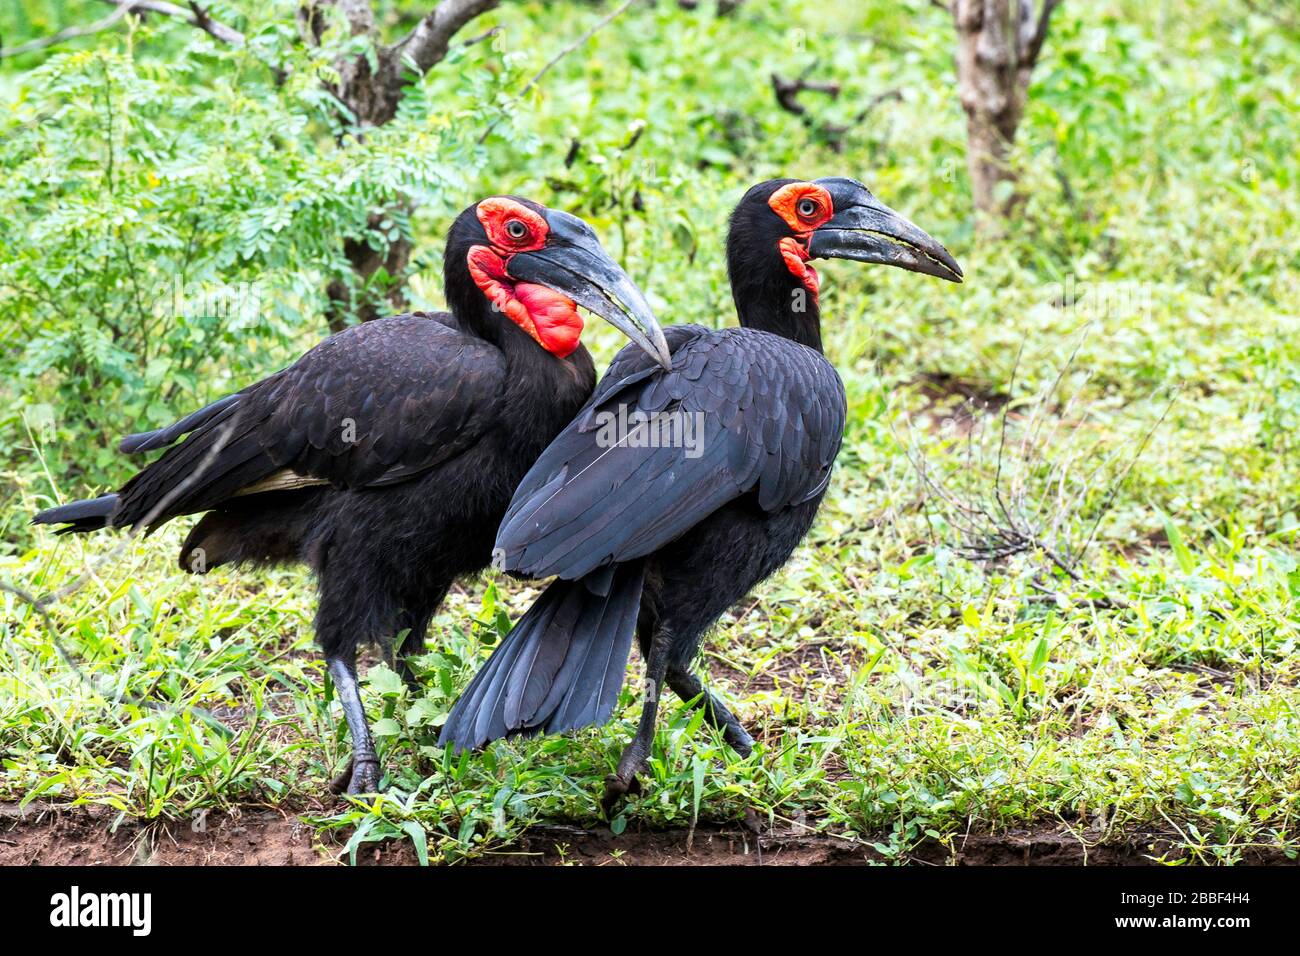 Breeding Pair of Southern Ground Hornbills Foraging in the Kruger National Park, South Africa Stock Photo